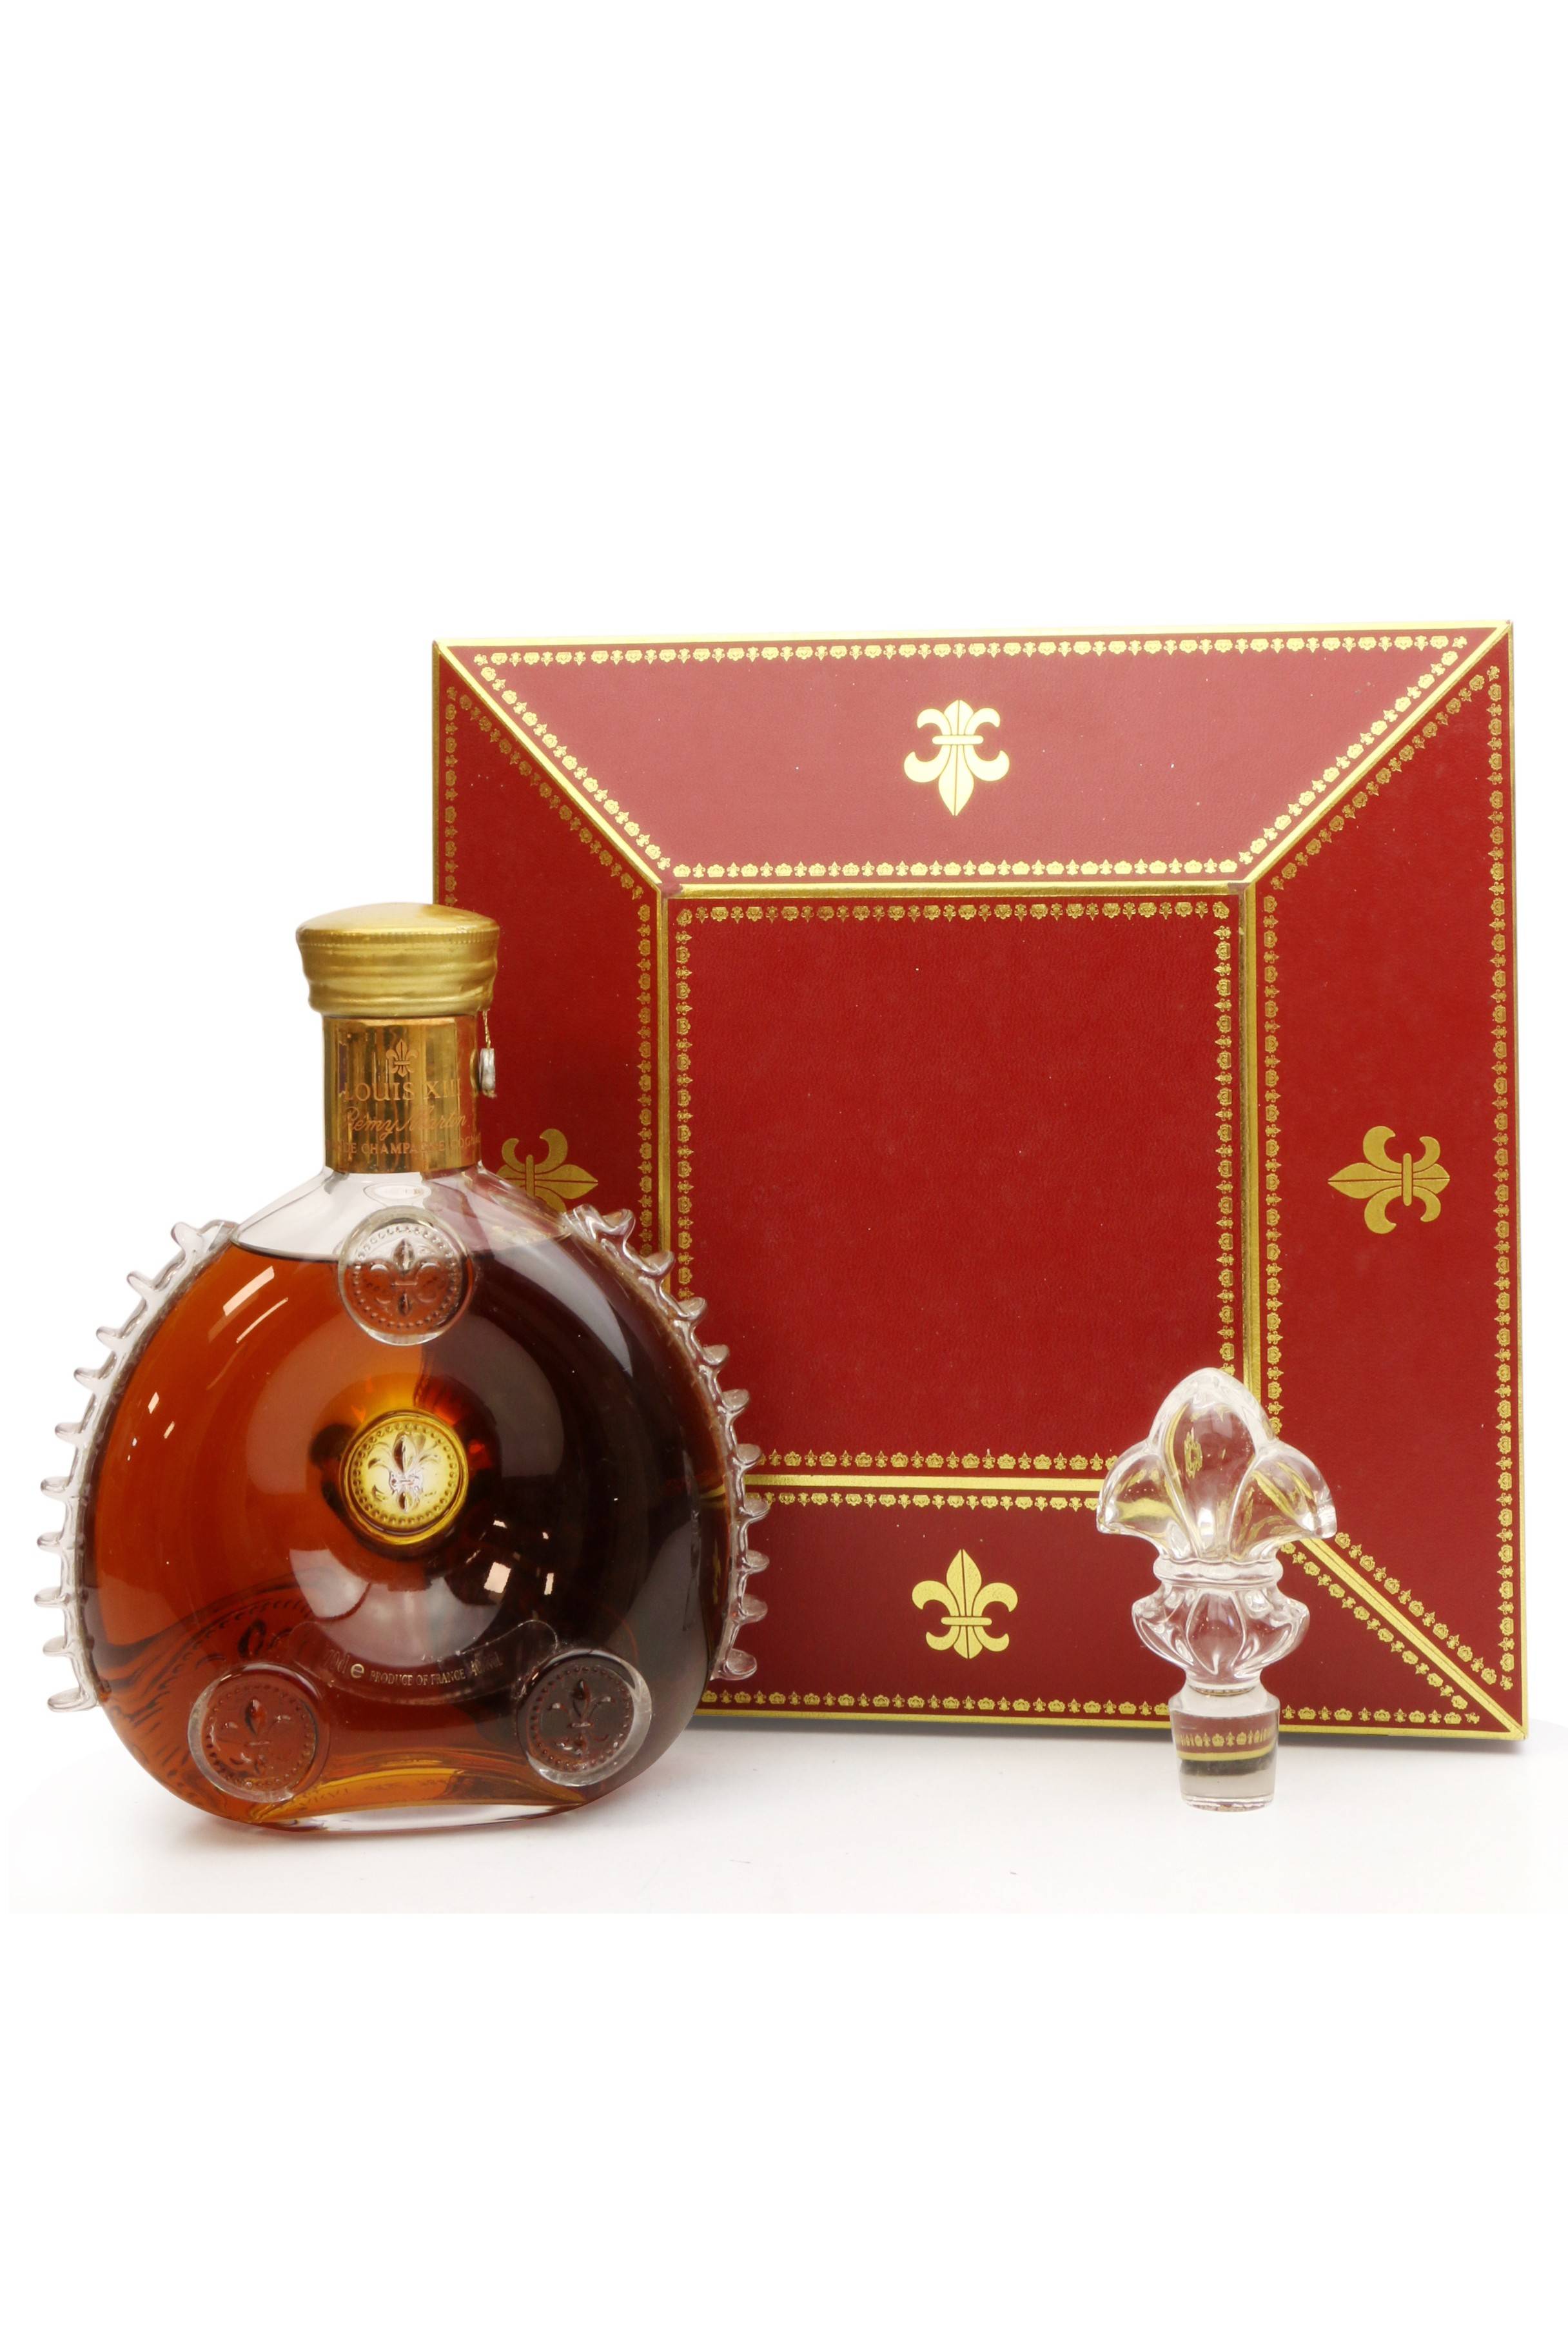 Sold at Auction: Remy Martin Louis XIII Very Old Grande Champagne